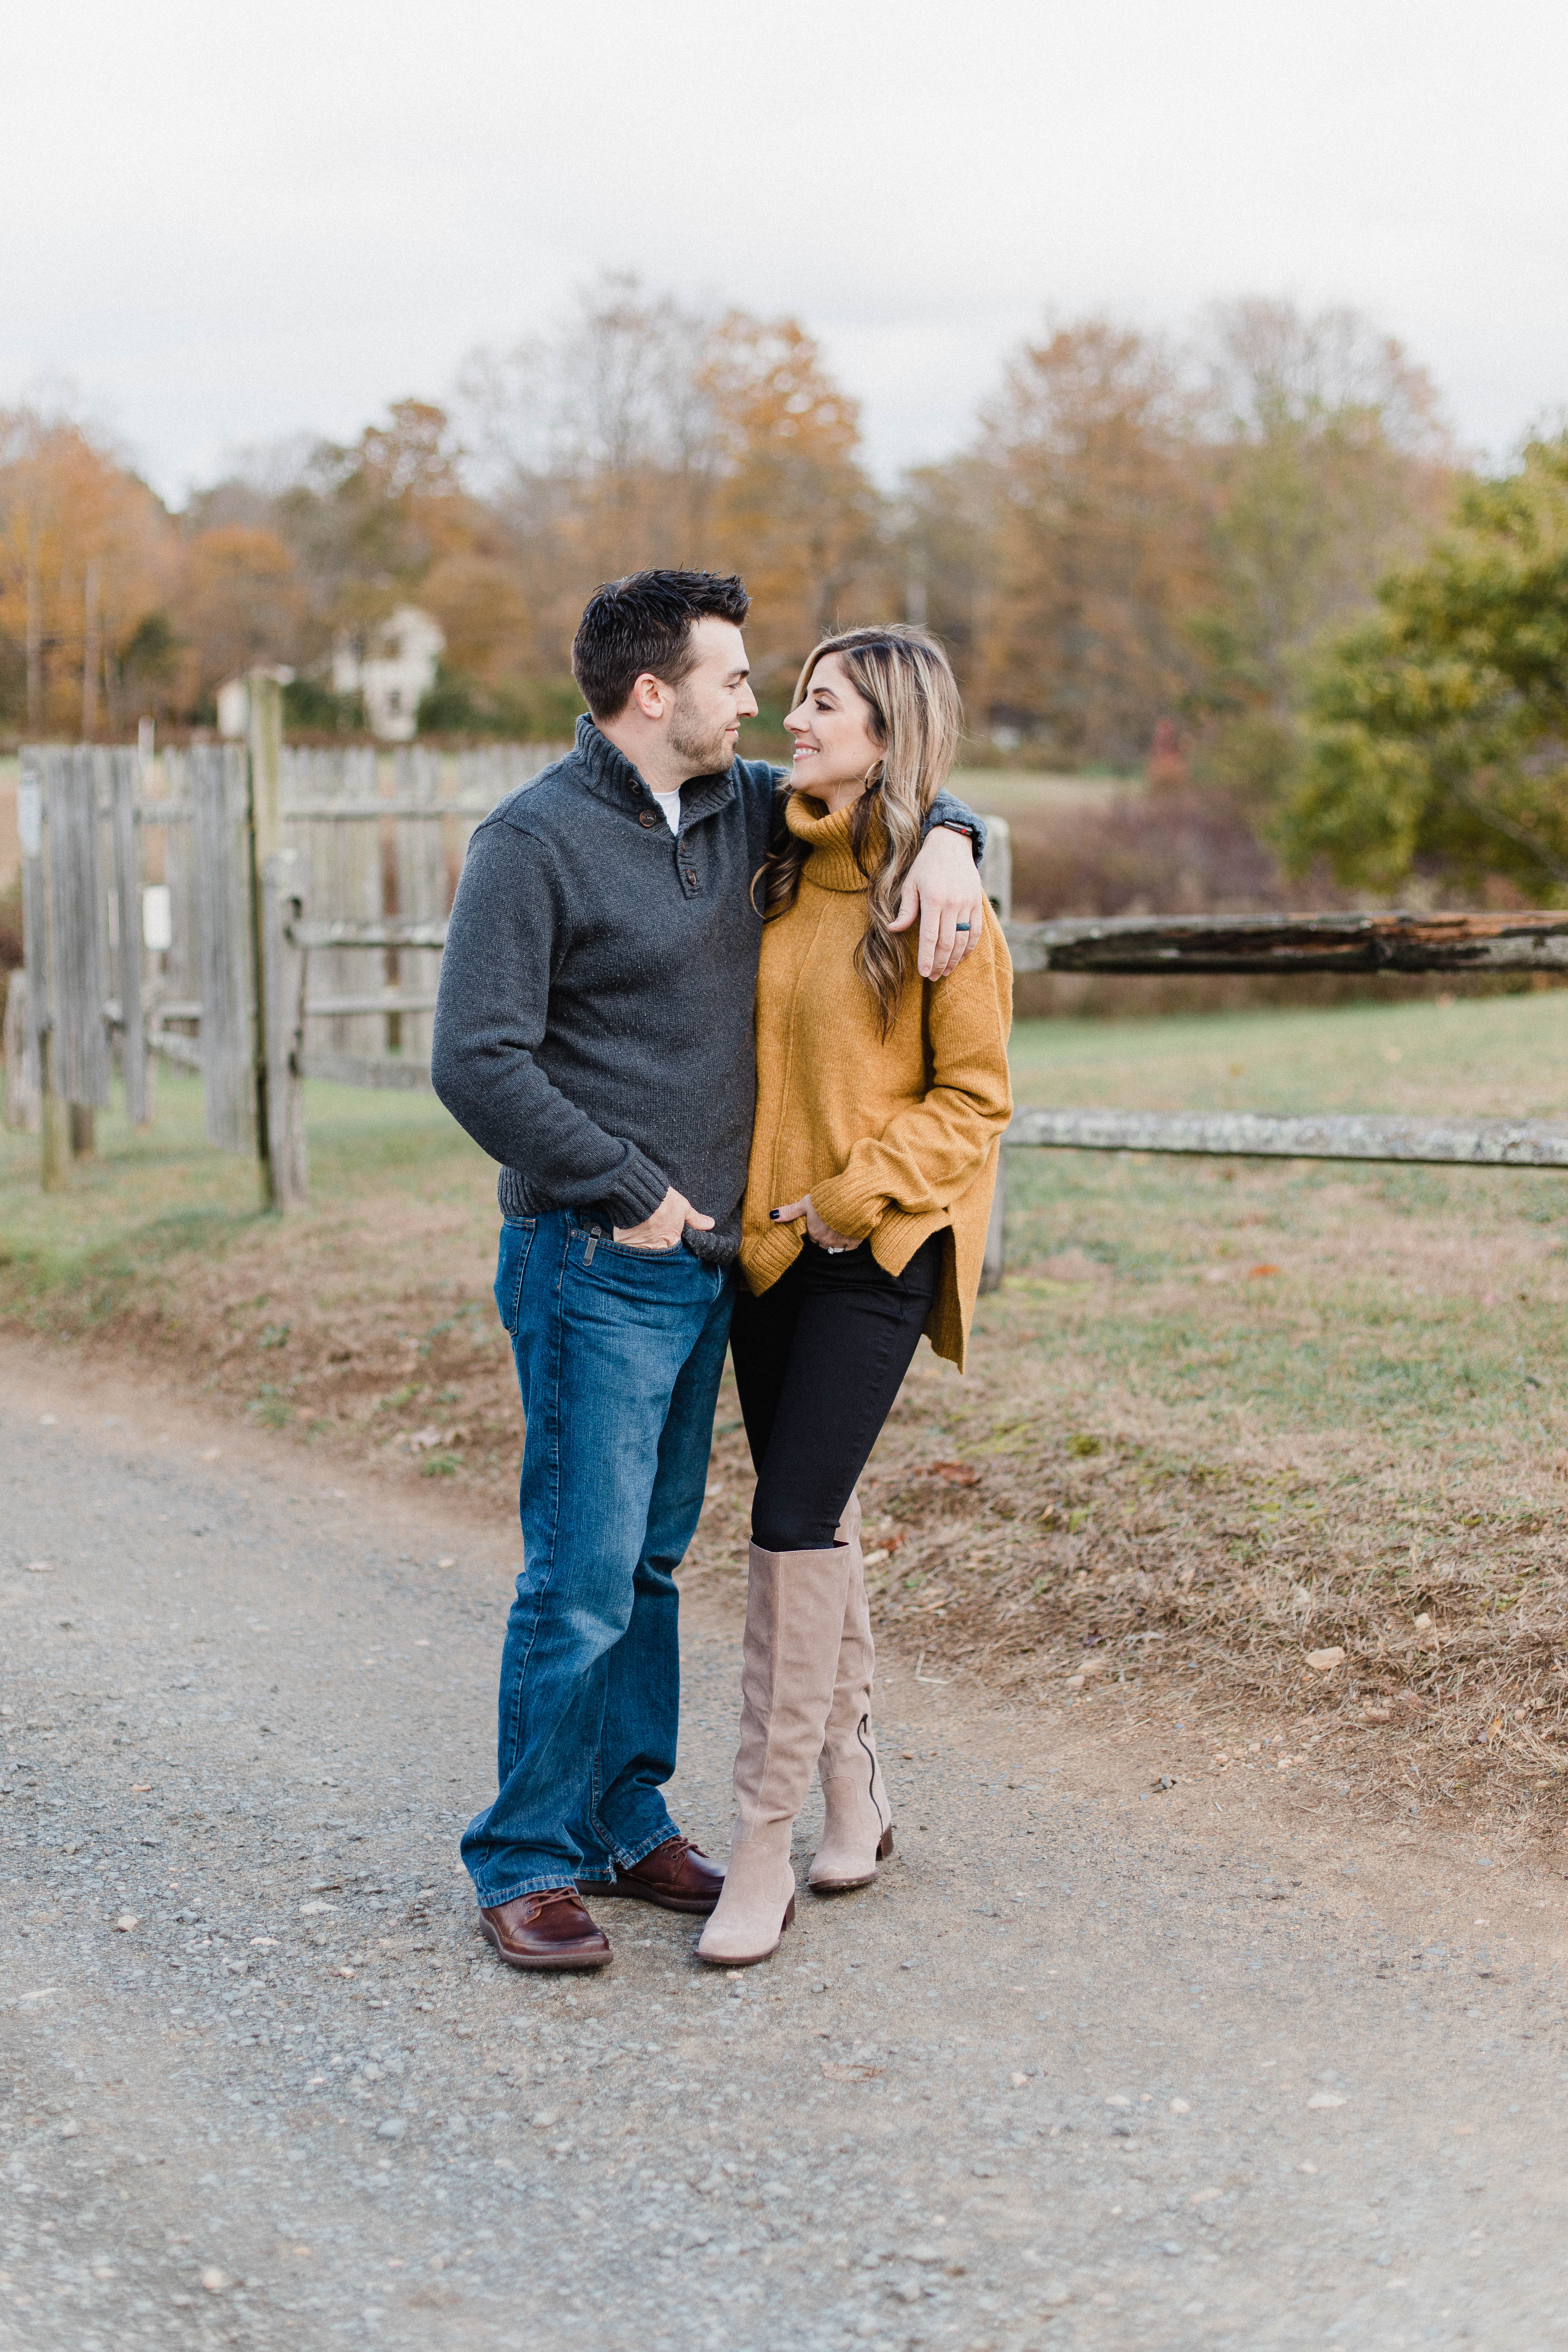 Connecticut life and style blogger Lauren McBride shares her marriages values and what makes her marriage work, including tips on communication, fighting clean, and putting each other first. 